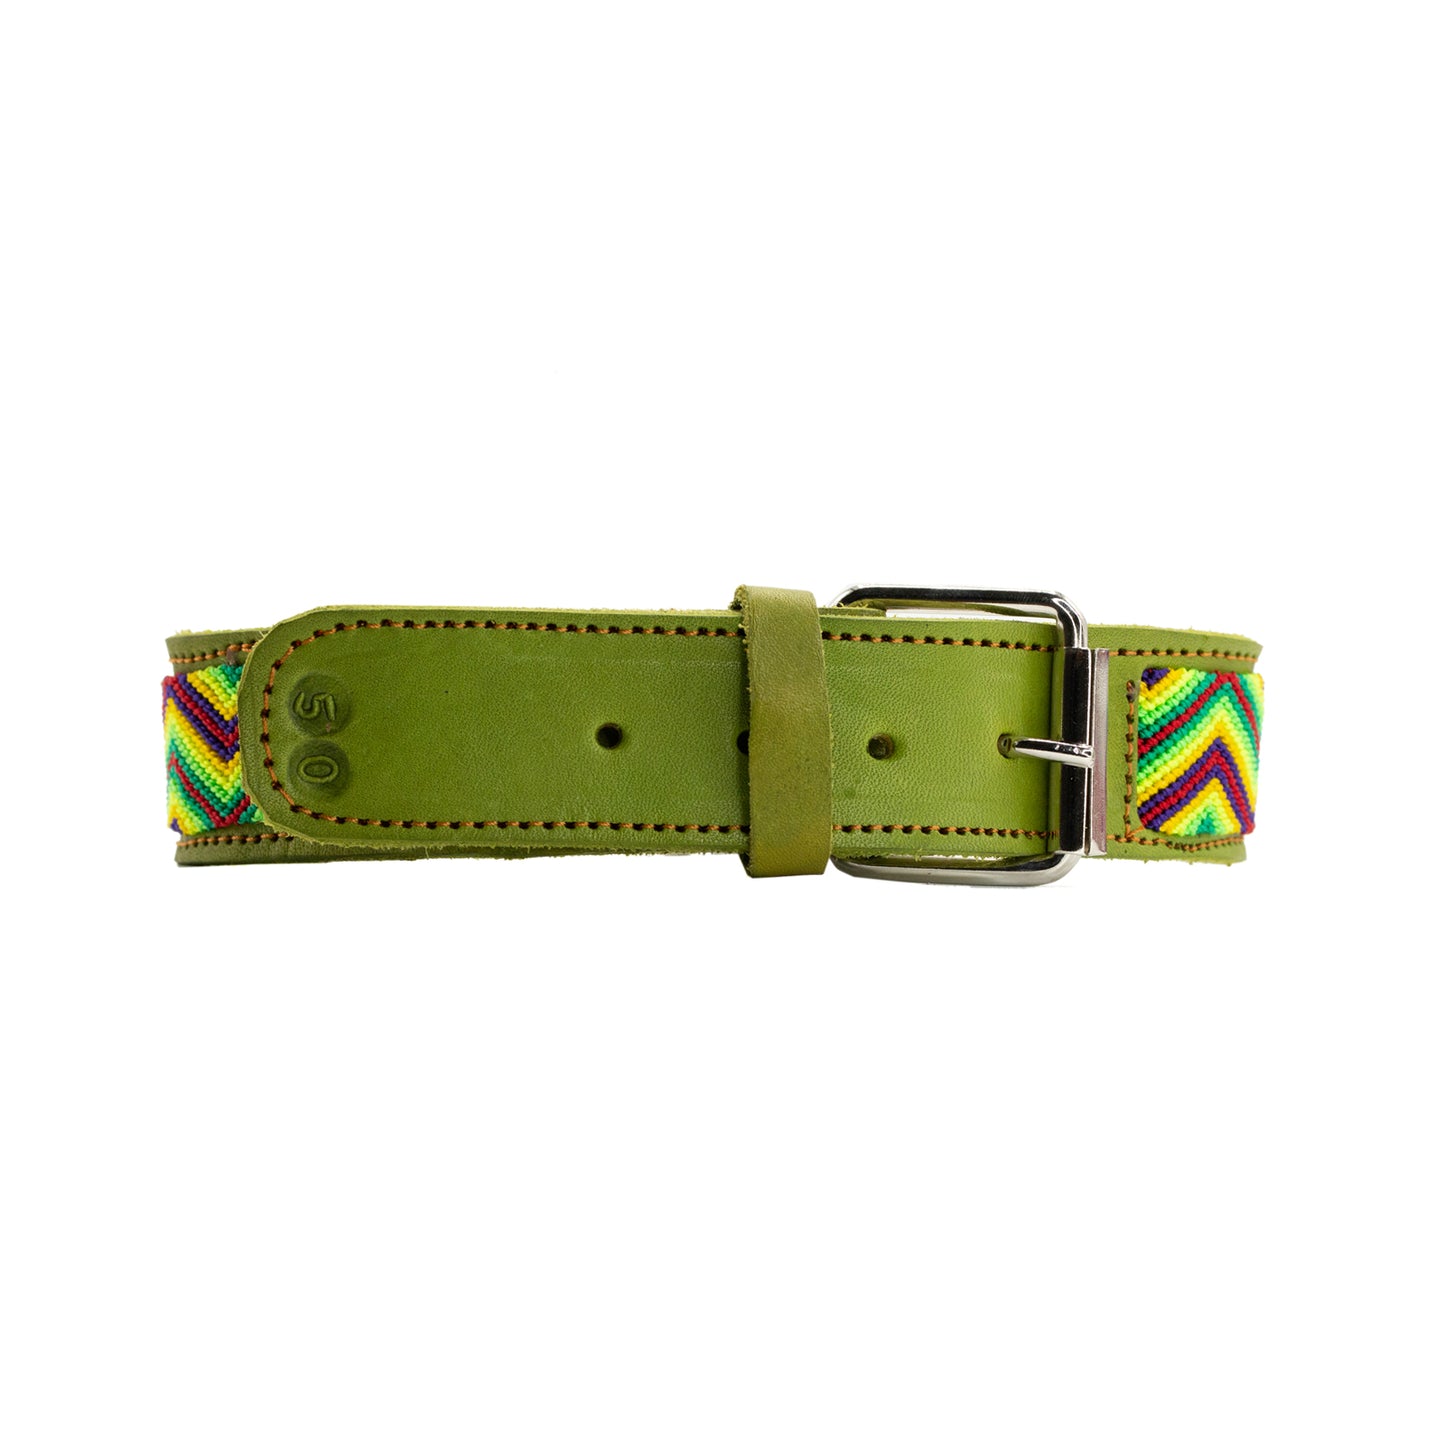 Colorful and stylish leather collar for pets with unique detailing